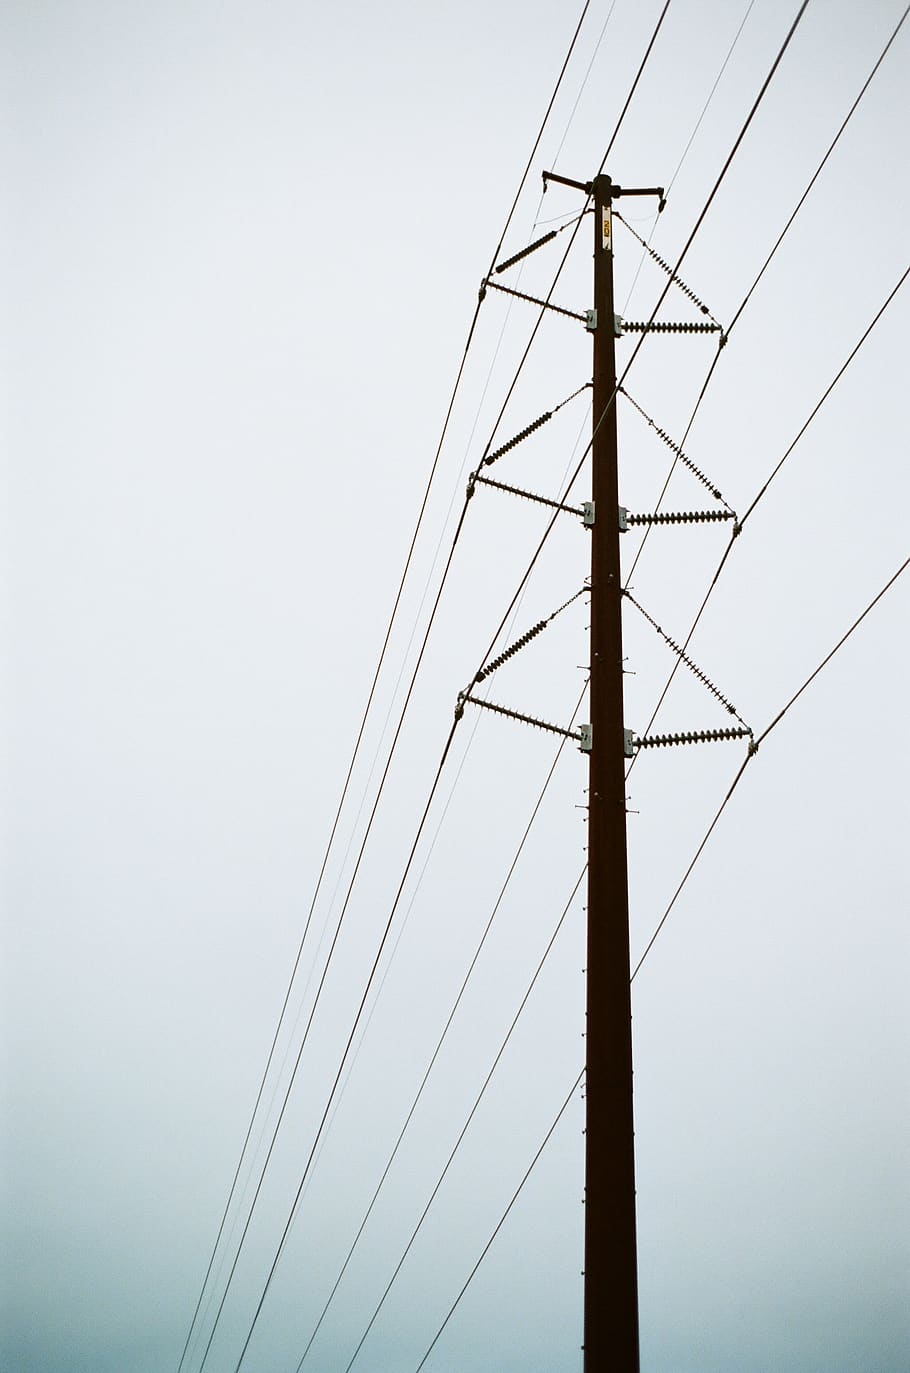 black street post at daytime, utility pole, cable, power lines, HD wallpaper